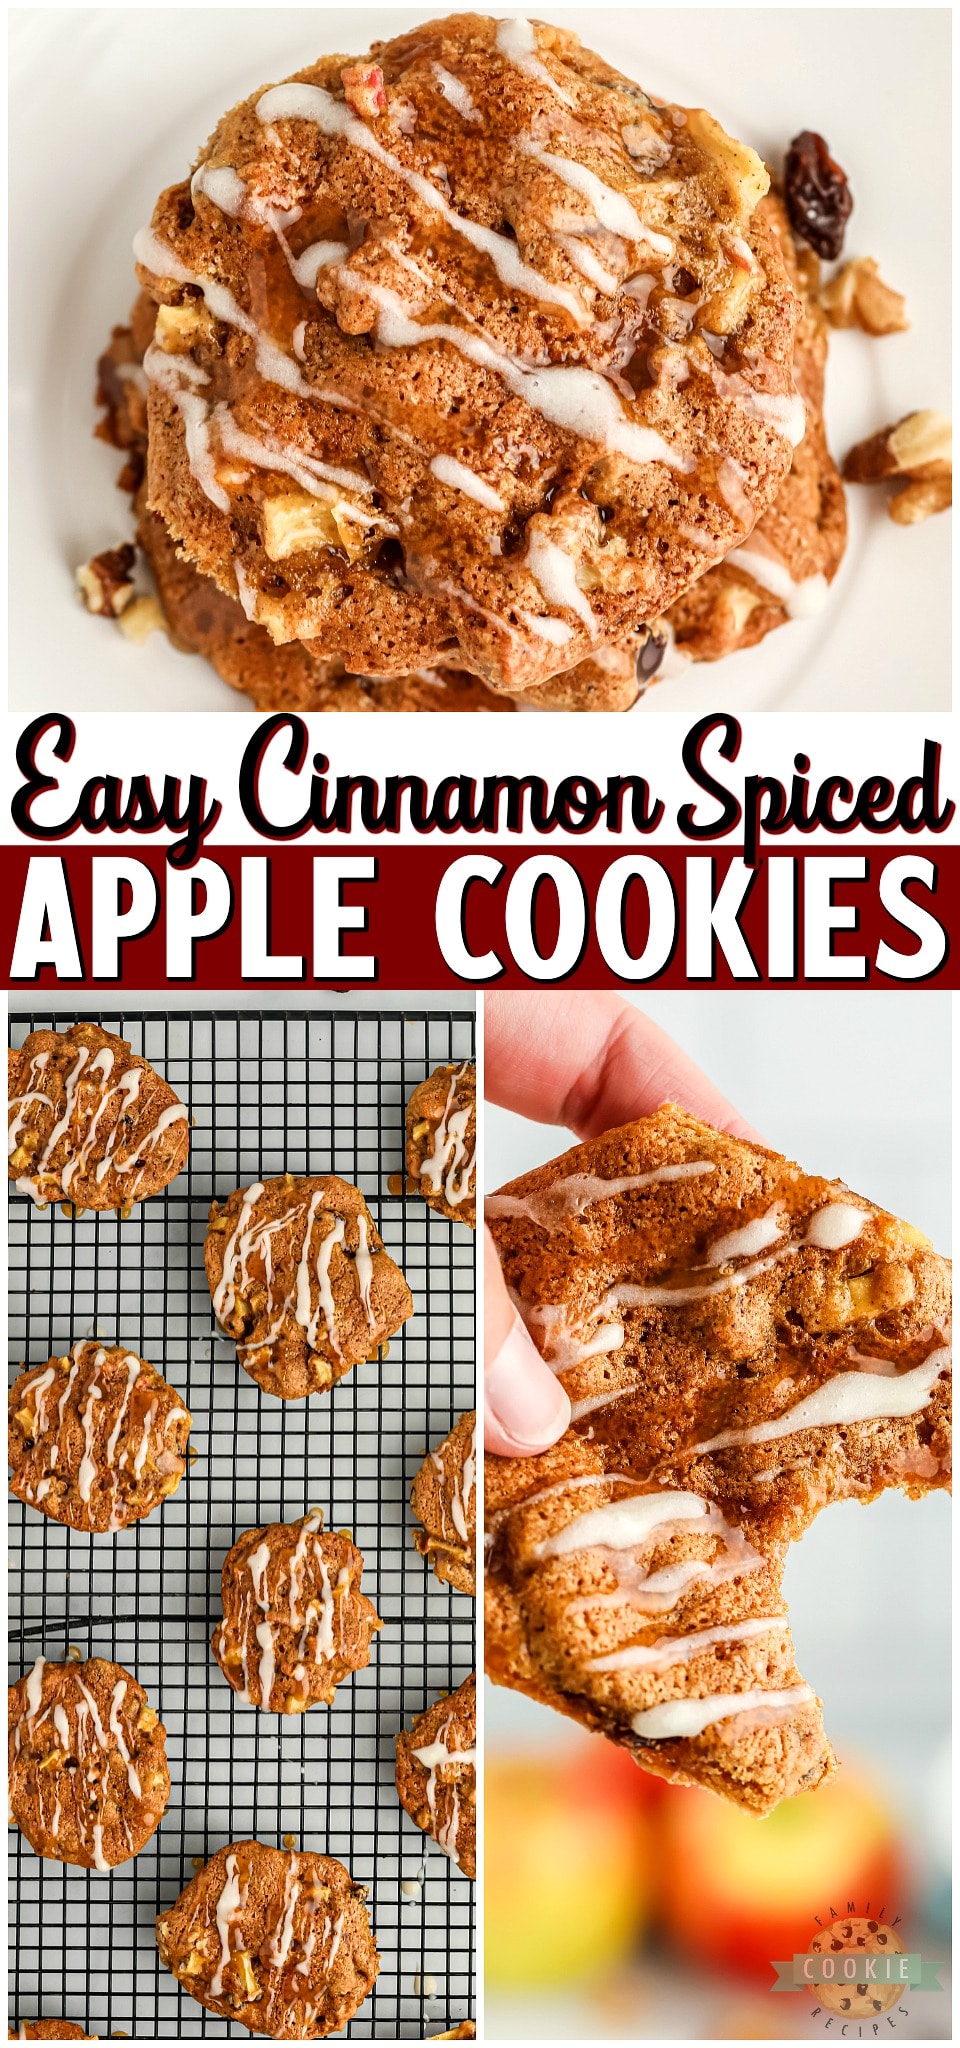 Apple Spice Cookies are soft & chewy cookies packed with fresh apples & fall spices! With chopped apples, walnuts, and a simple powdered sugar glaze on top, these cookies are hard to resist!